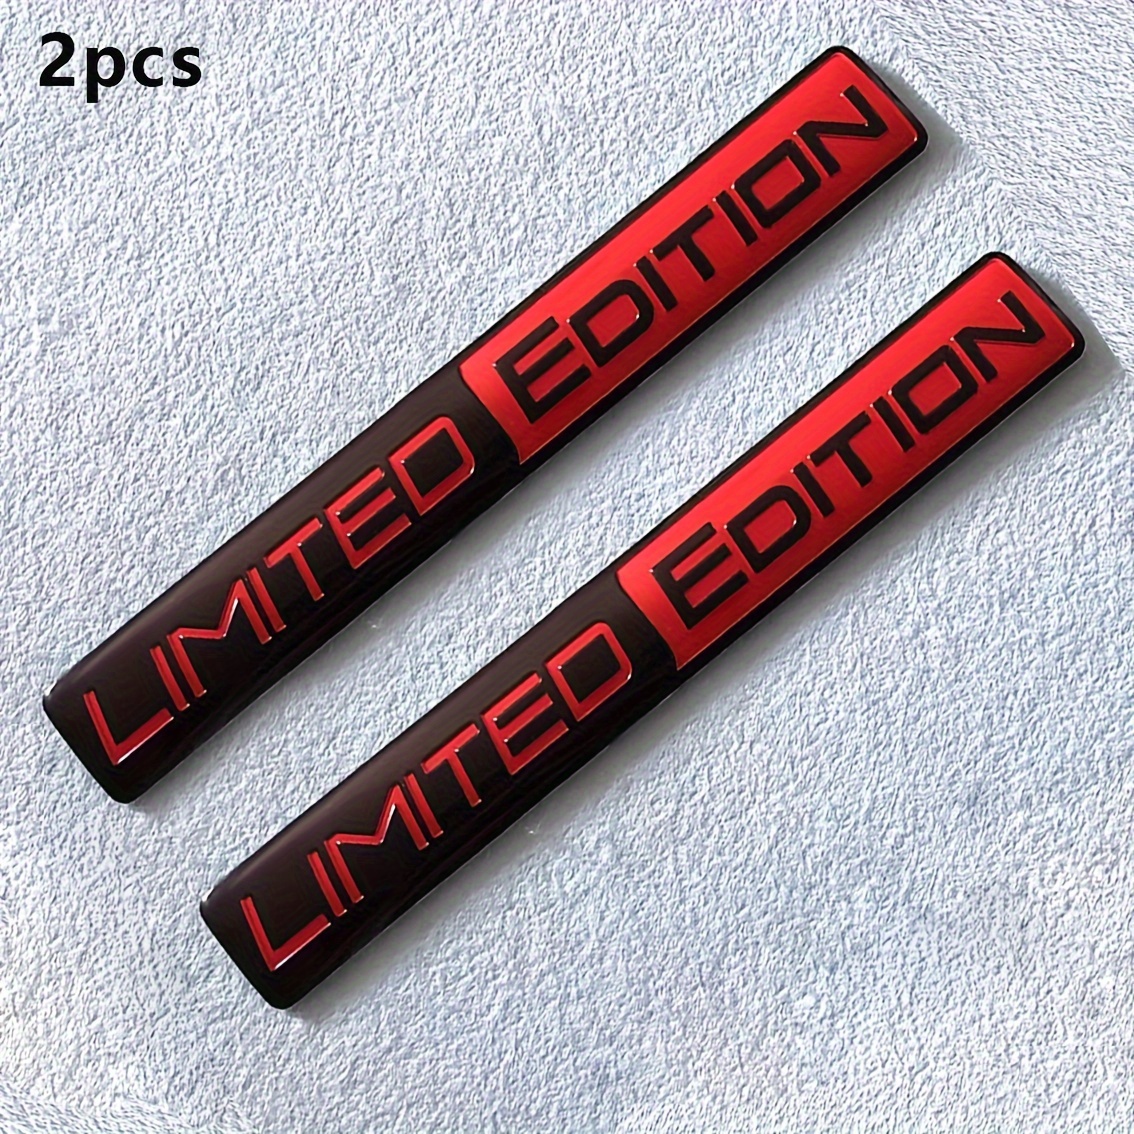 

2pcs Limited Edition Emblem Metal Badges Decal Sticker Auto Racing Sport Emblem For Rear Trunk Side Fender Car Motorcycle Sticker Accessories